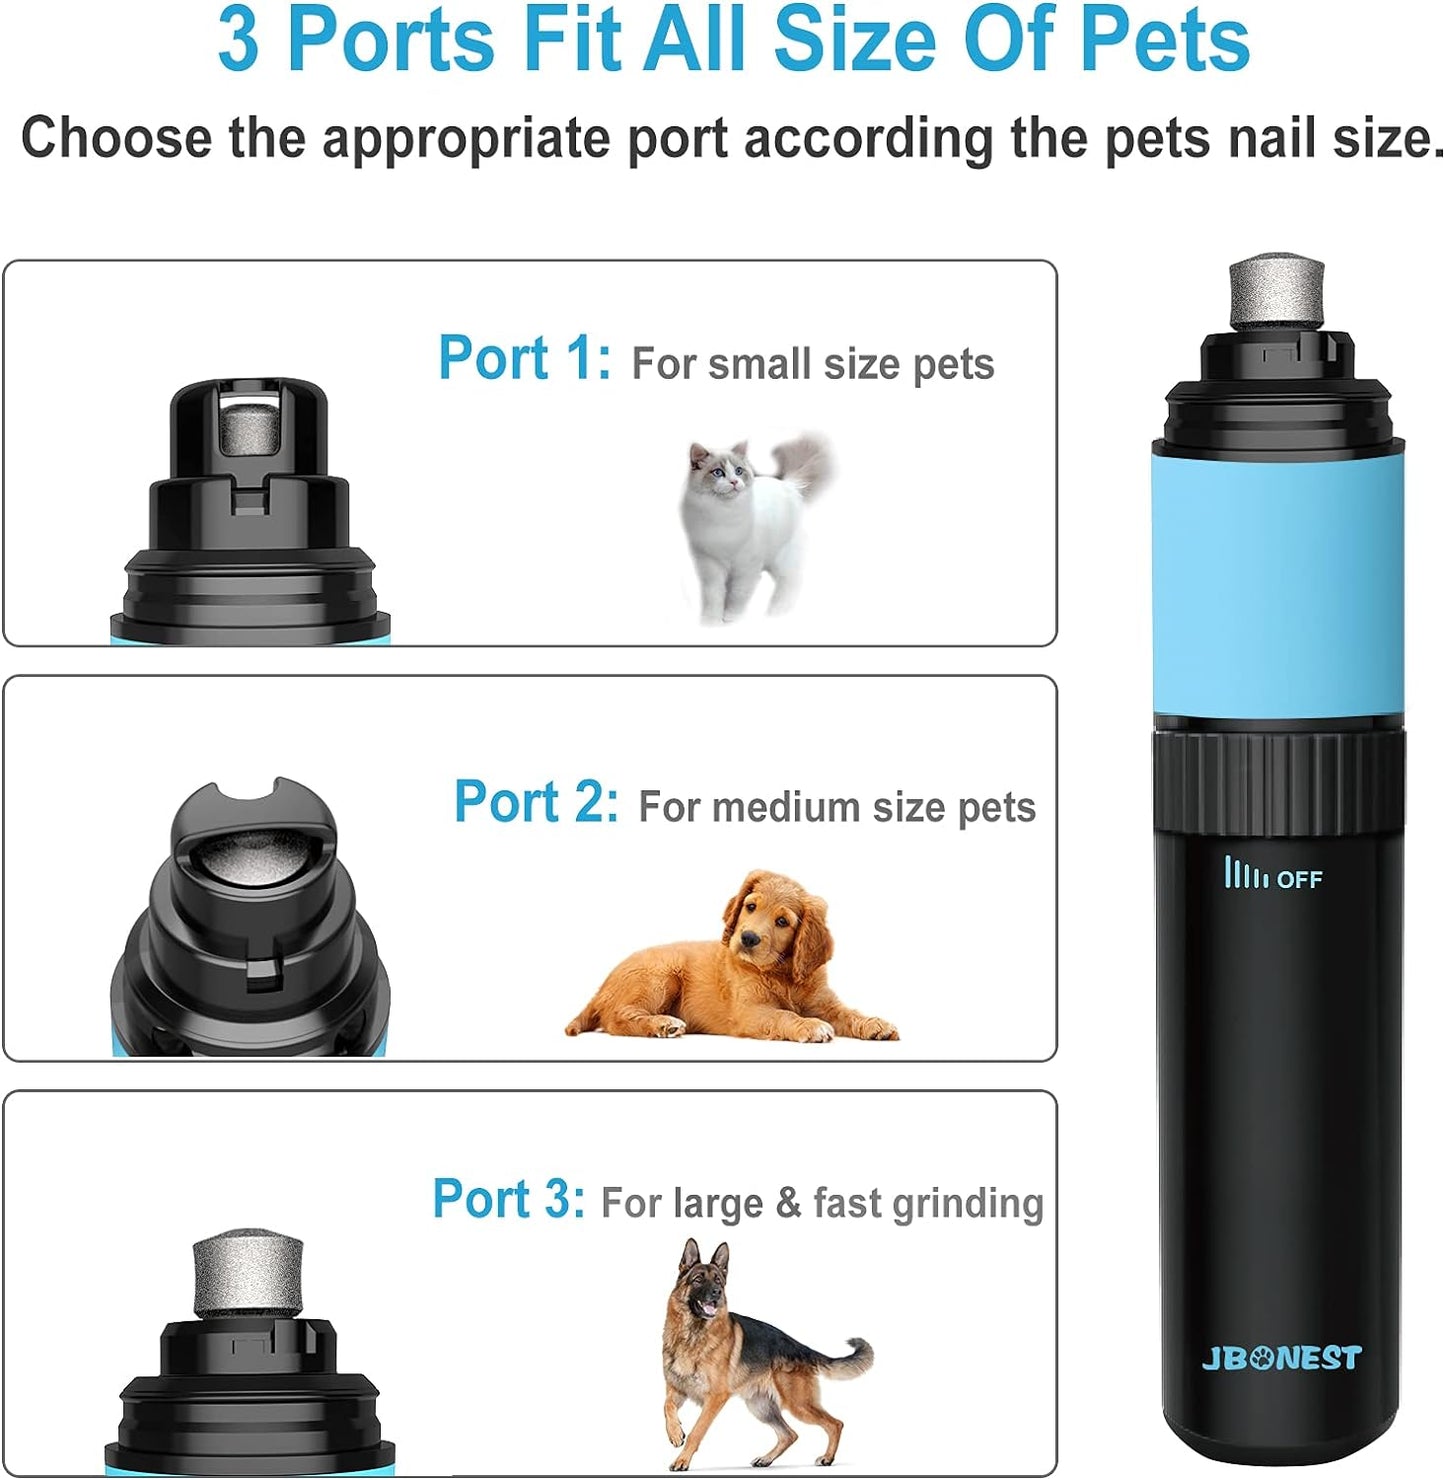 JBONEST Dog Nail Grinder Upgraded- Professional LED Lighting Stepless Speed Rechargeable Pet Nail Trimmer with Clipper,Quite Low Noise,20h Long Working Time for Large Medium Small Dogs Cats Pets